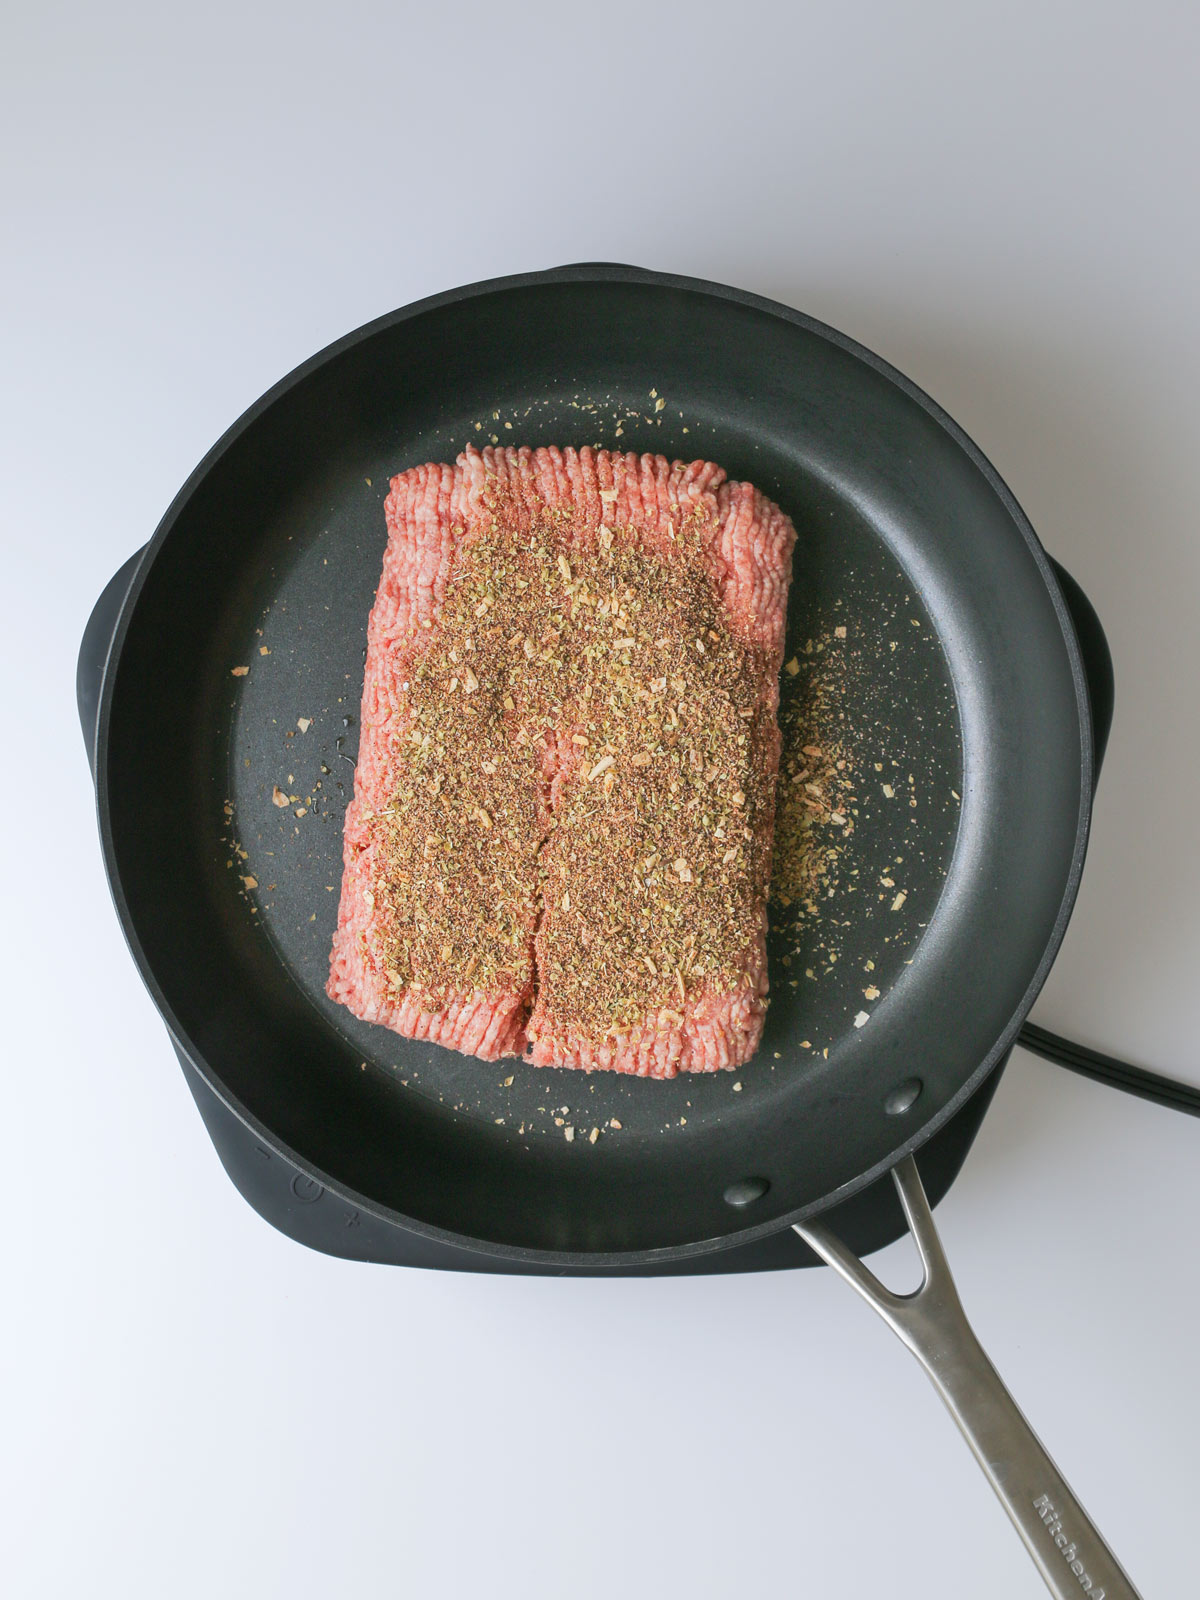 meat and seasoning in skillet prior to cooking.